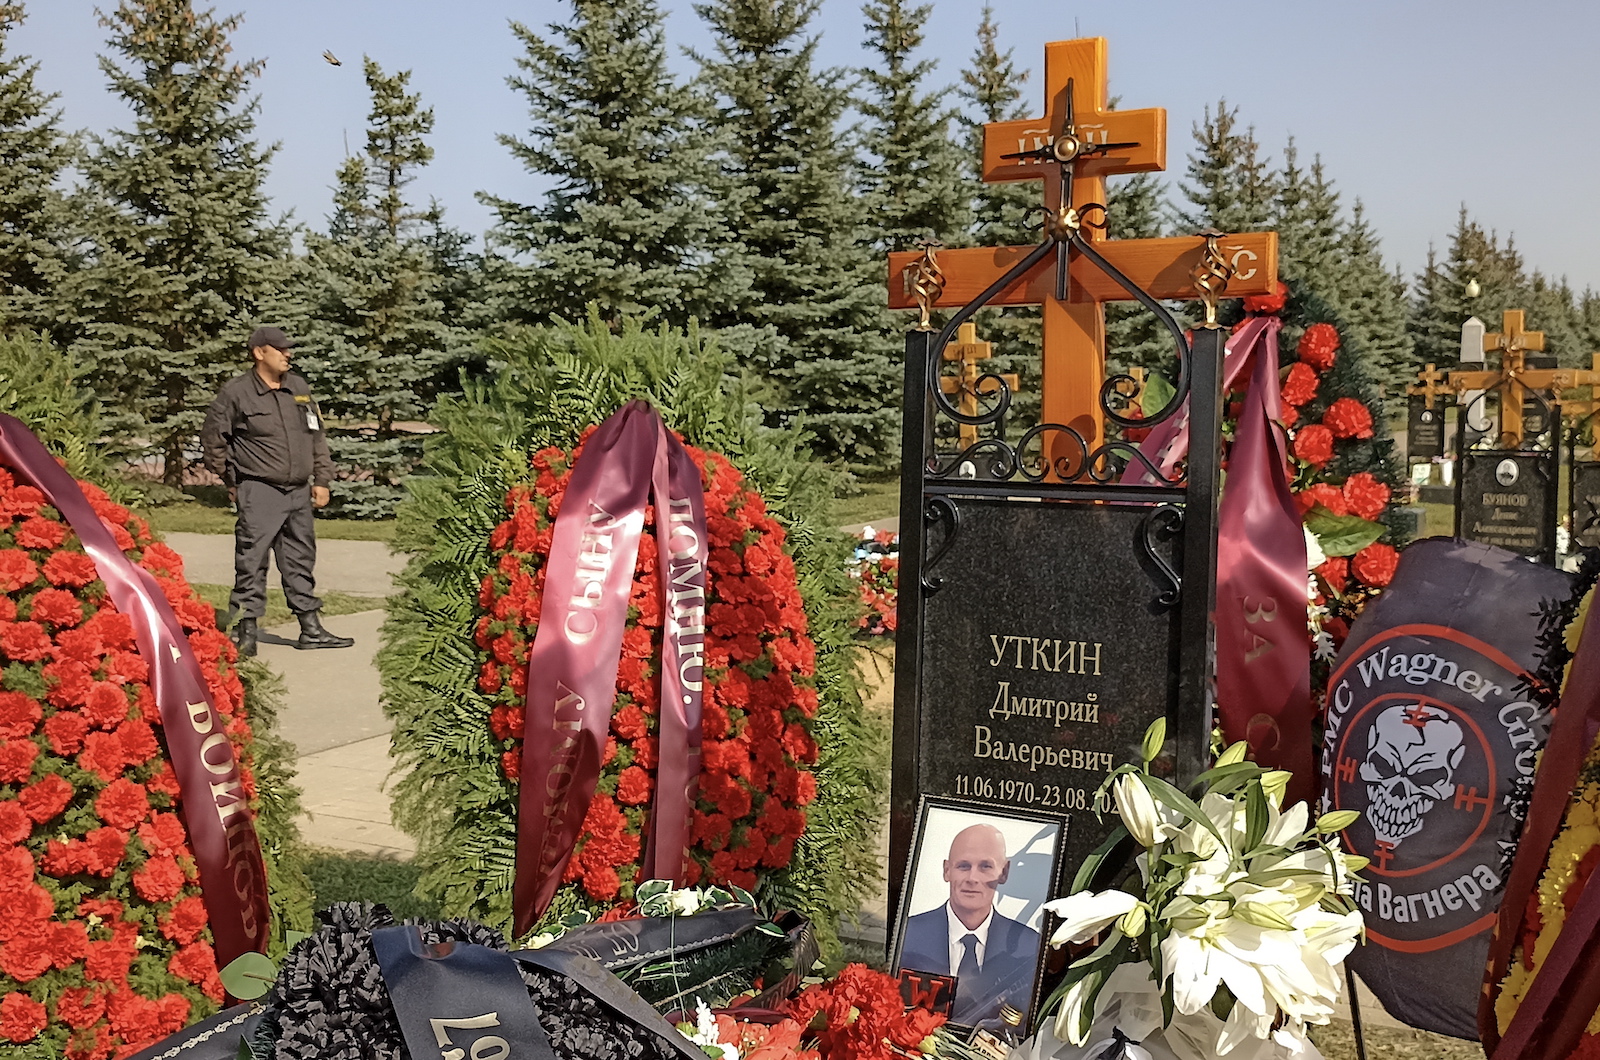 epa10830773 A security guard stands beside the grave of PMC Wagner group's alleged co-founder and military commander Dmitry Utkin, killed in a plane crash in Tver region, at the Federal Military Memorial Cemetery in Mytishchi, Moscow region, Russia, 31 August 2023. On the evening of August 23, the plane carrying the Wagner group's head Yevgeny Prigozhin crashed in the Tver region. Russian authorities on 27 August confirmed that Prigozhin died along with nine others in the crash, including private military company (PMC) Wagner commander Dmitry Utkin.  EPA/MAXIM SHIPENKOV